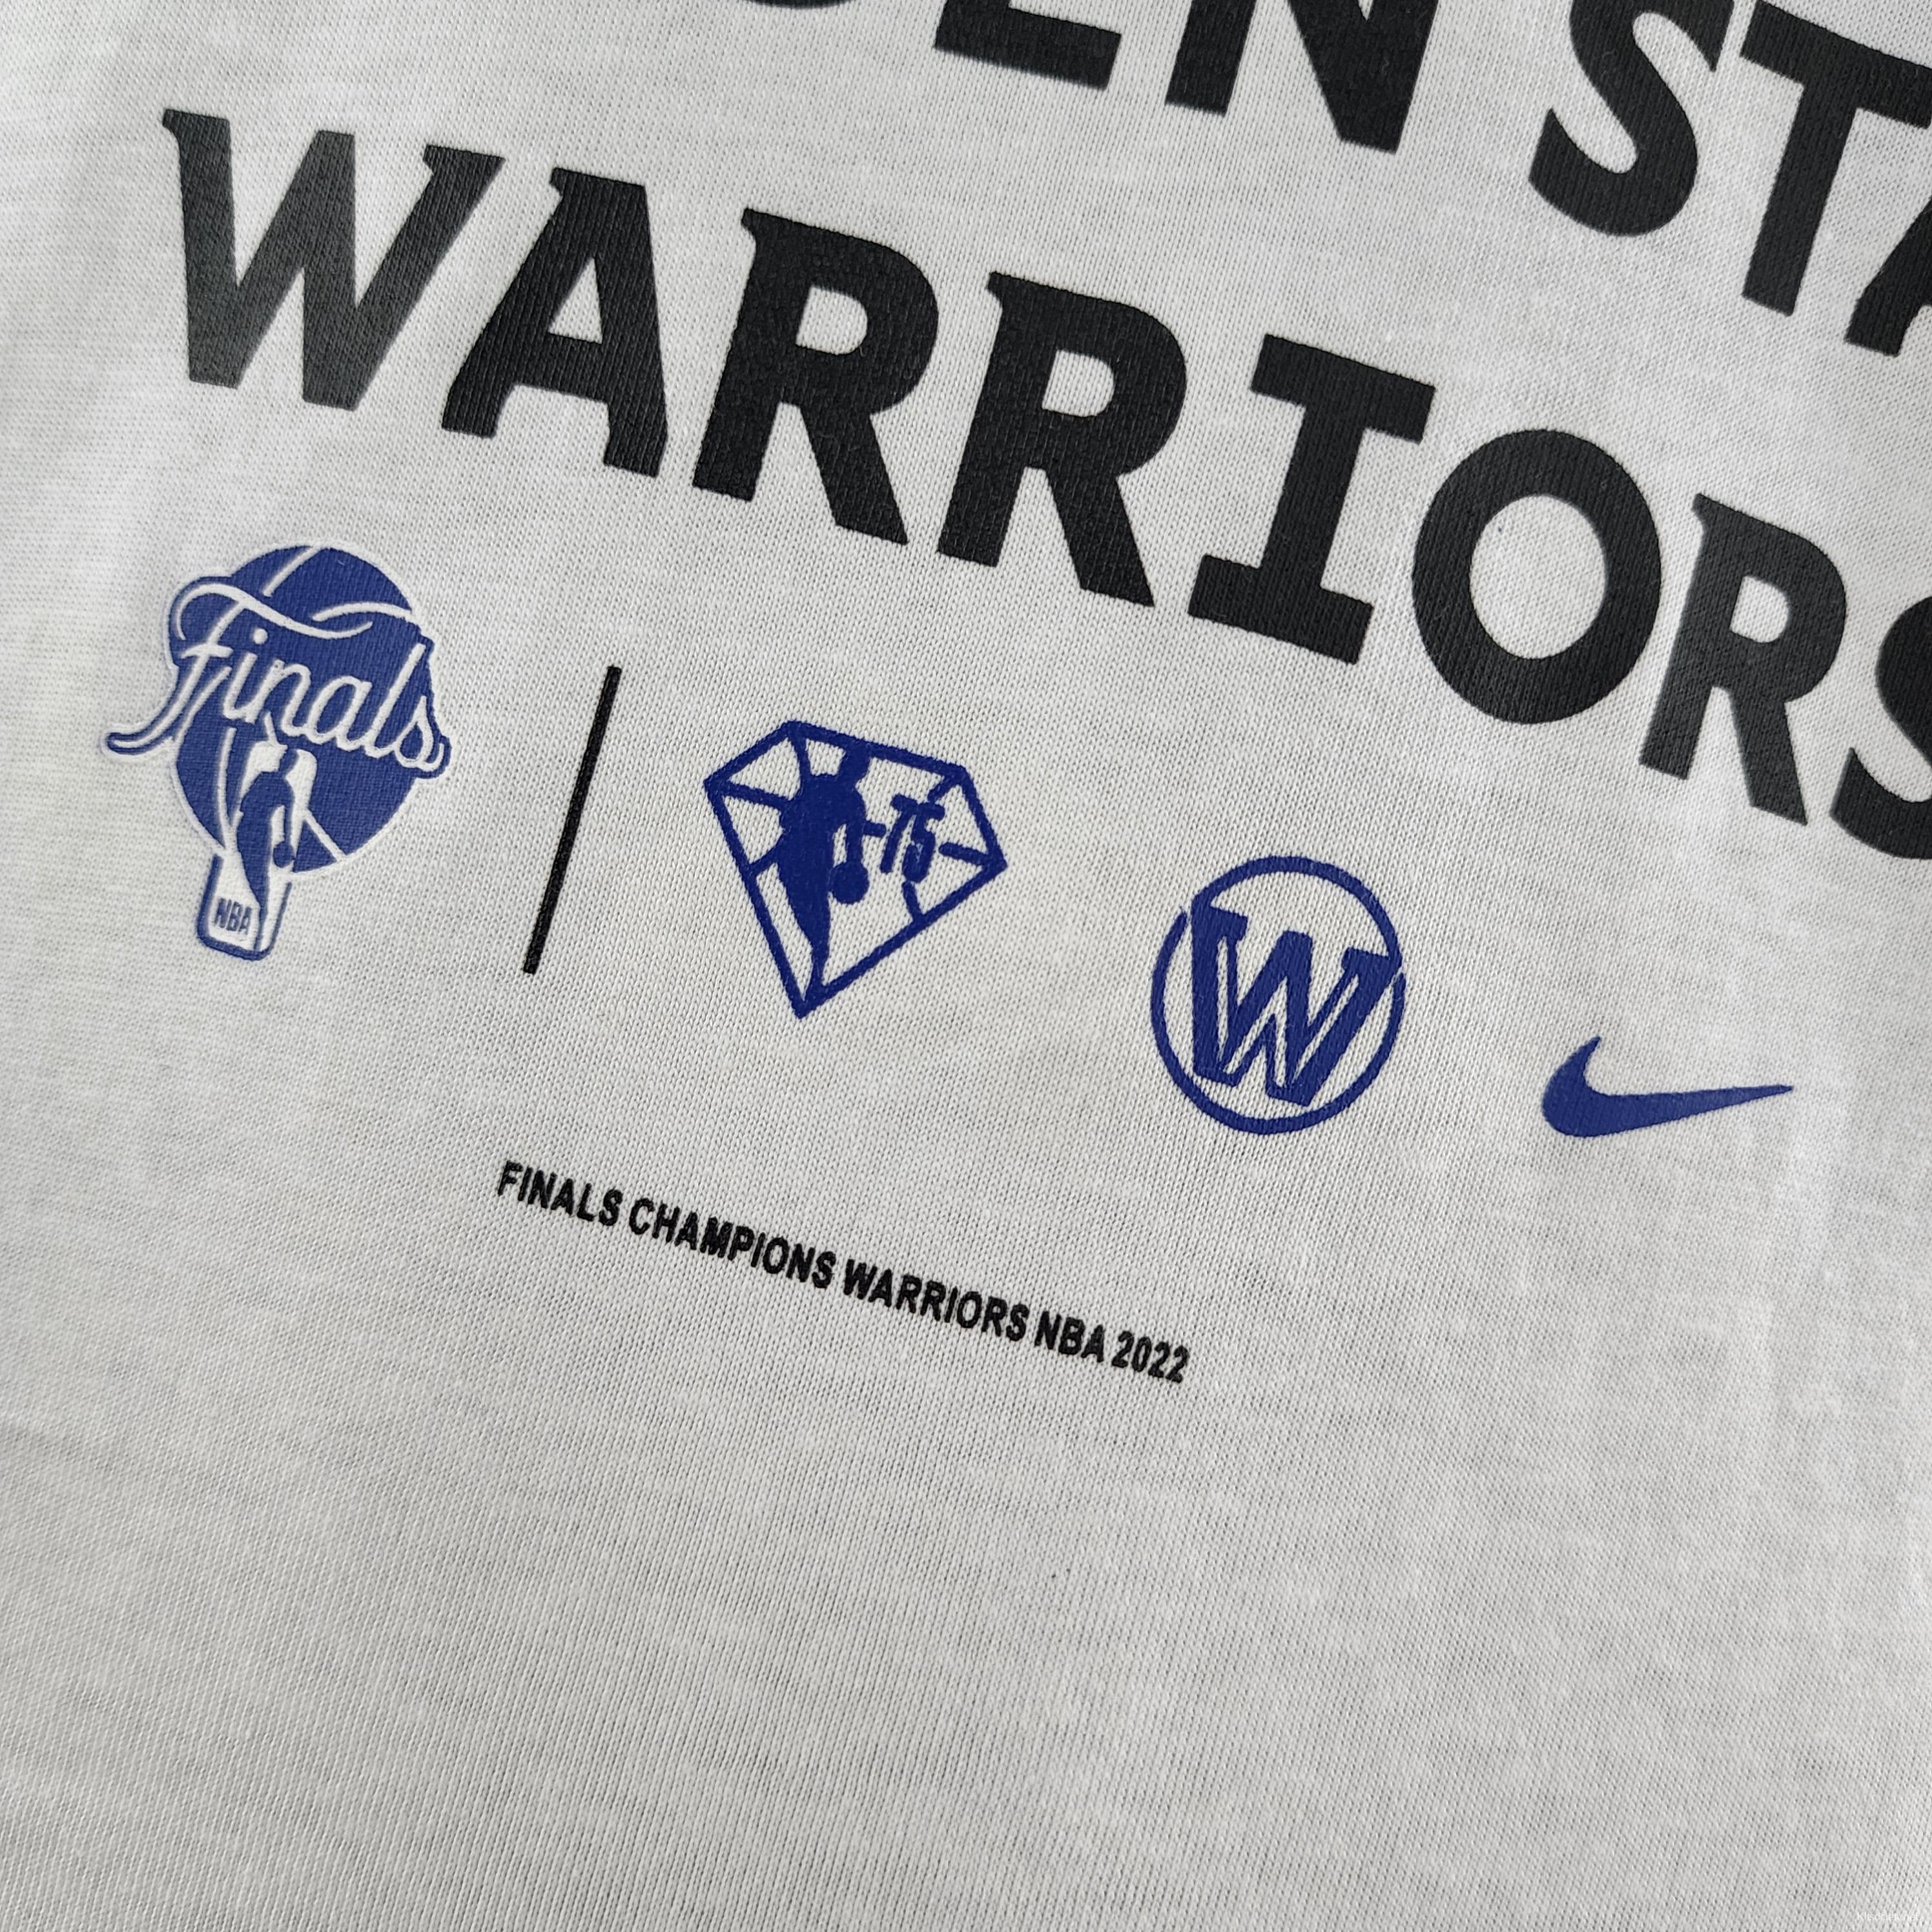 Golden State Warriors Nike 2022 NBA Finals Champion Roster T-Shirt White L  NWT